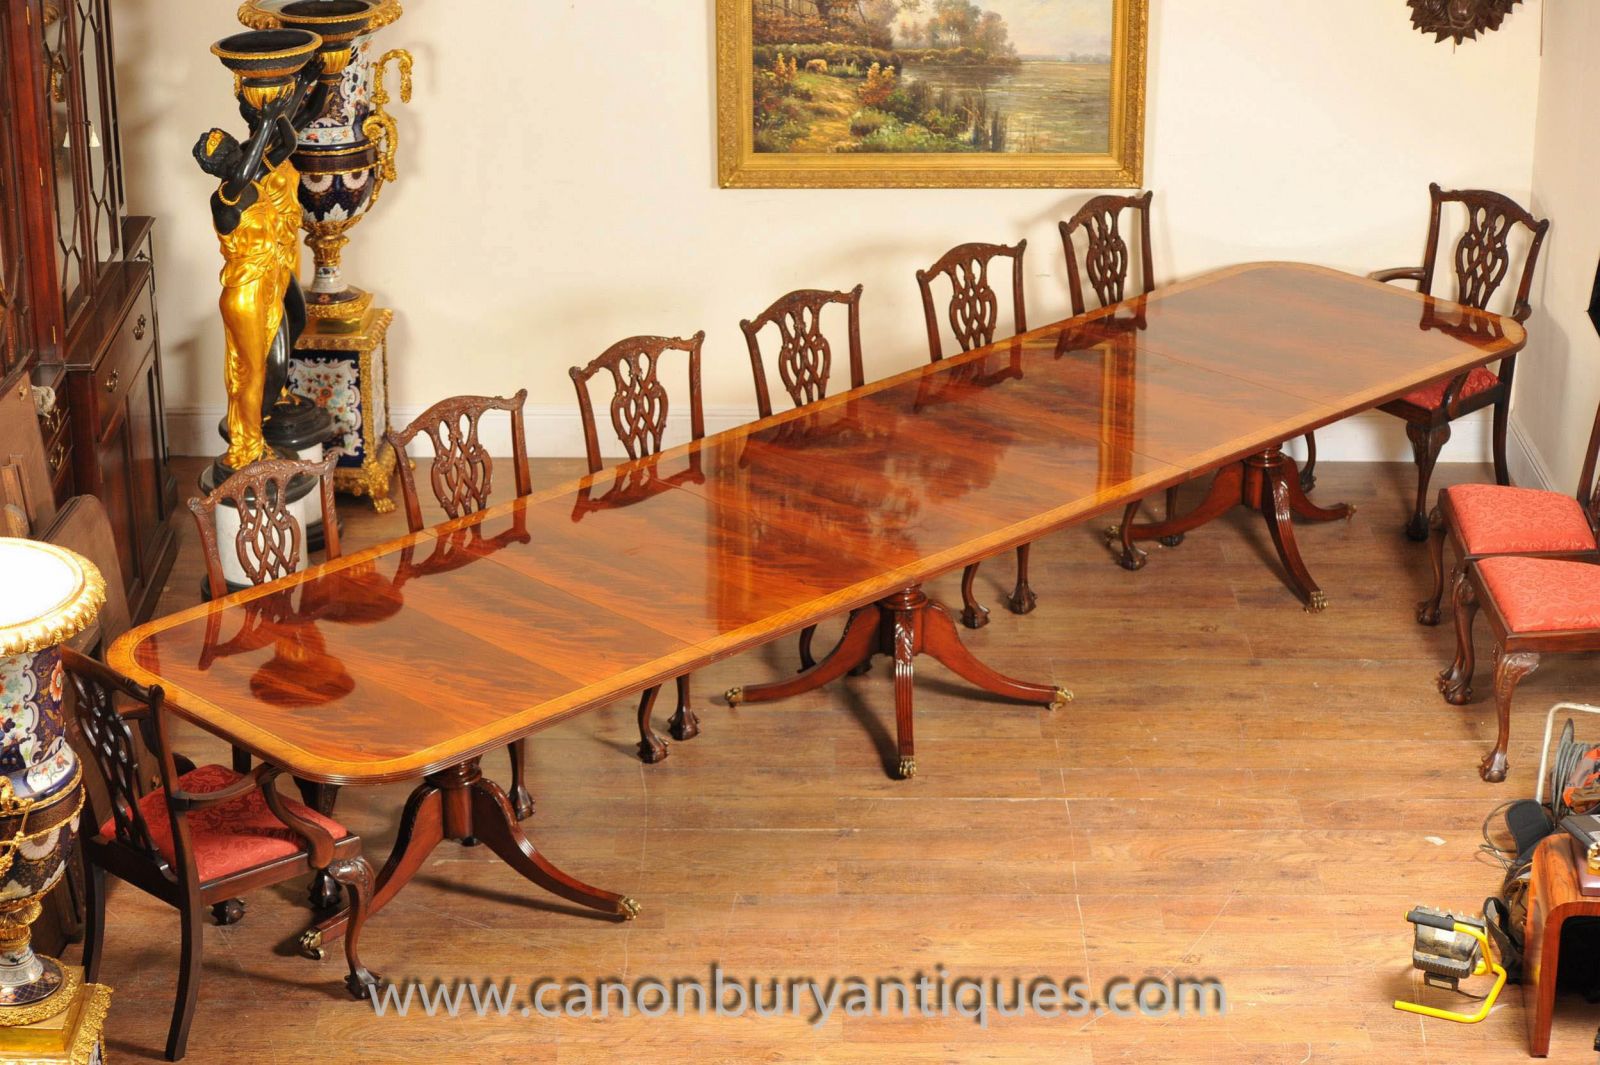 Regency table with set of Chippendale dining chairs to match